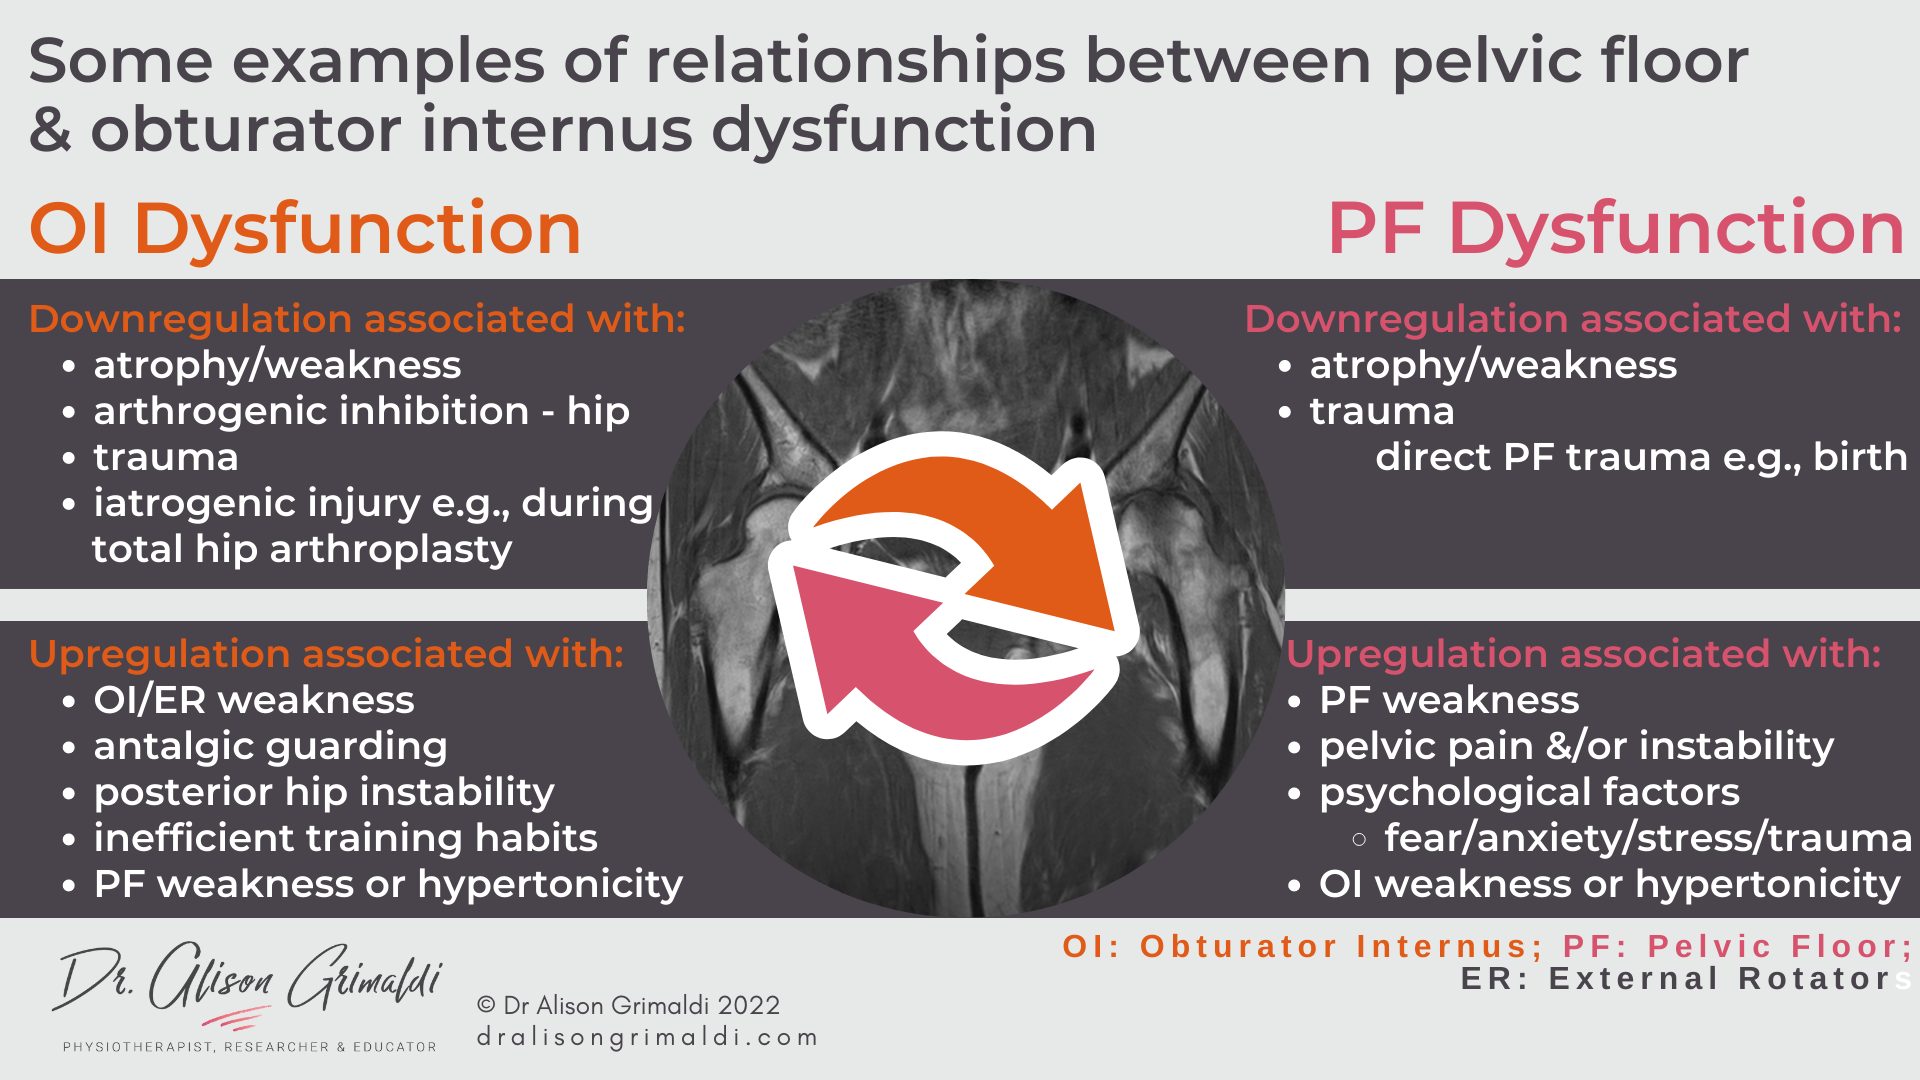 Table outlining relationships between pelvic floor and obturator internus dysfunction